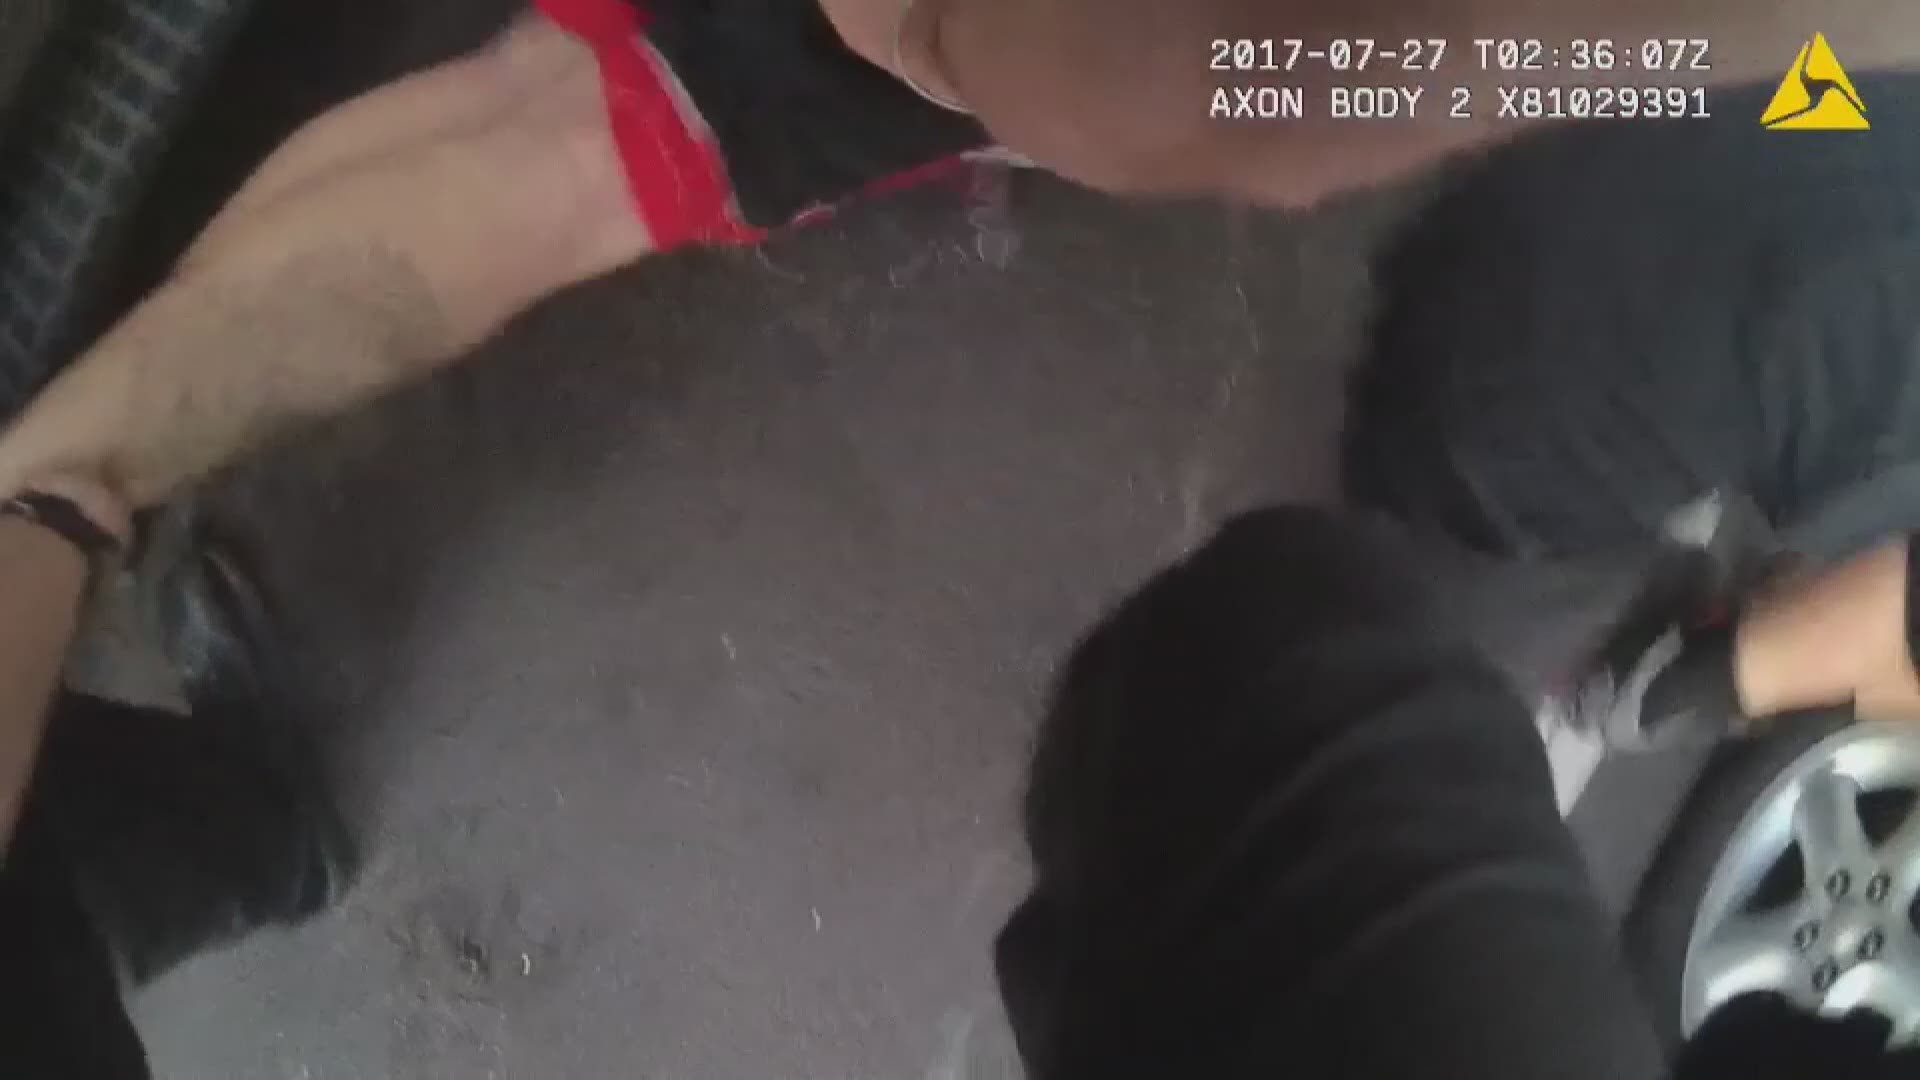 Glendale PD's report said the officer's actions in this clip were within policy under defensive and active resistance.